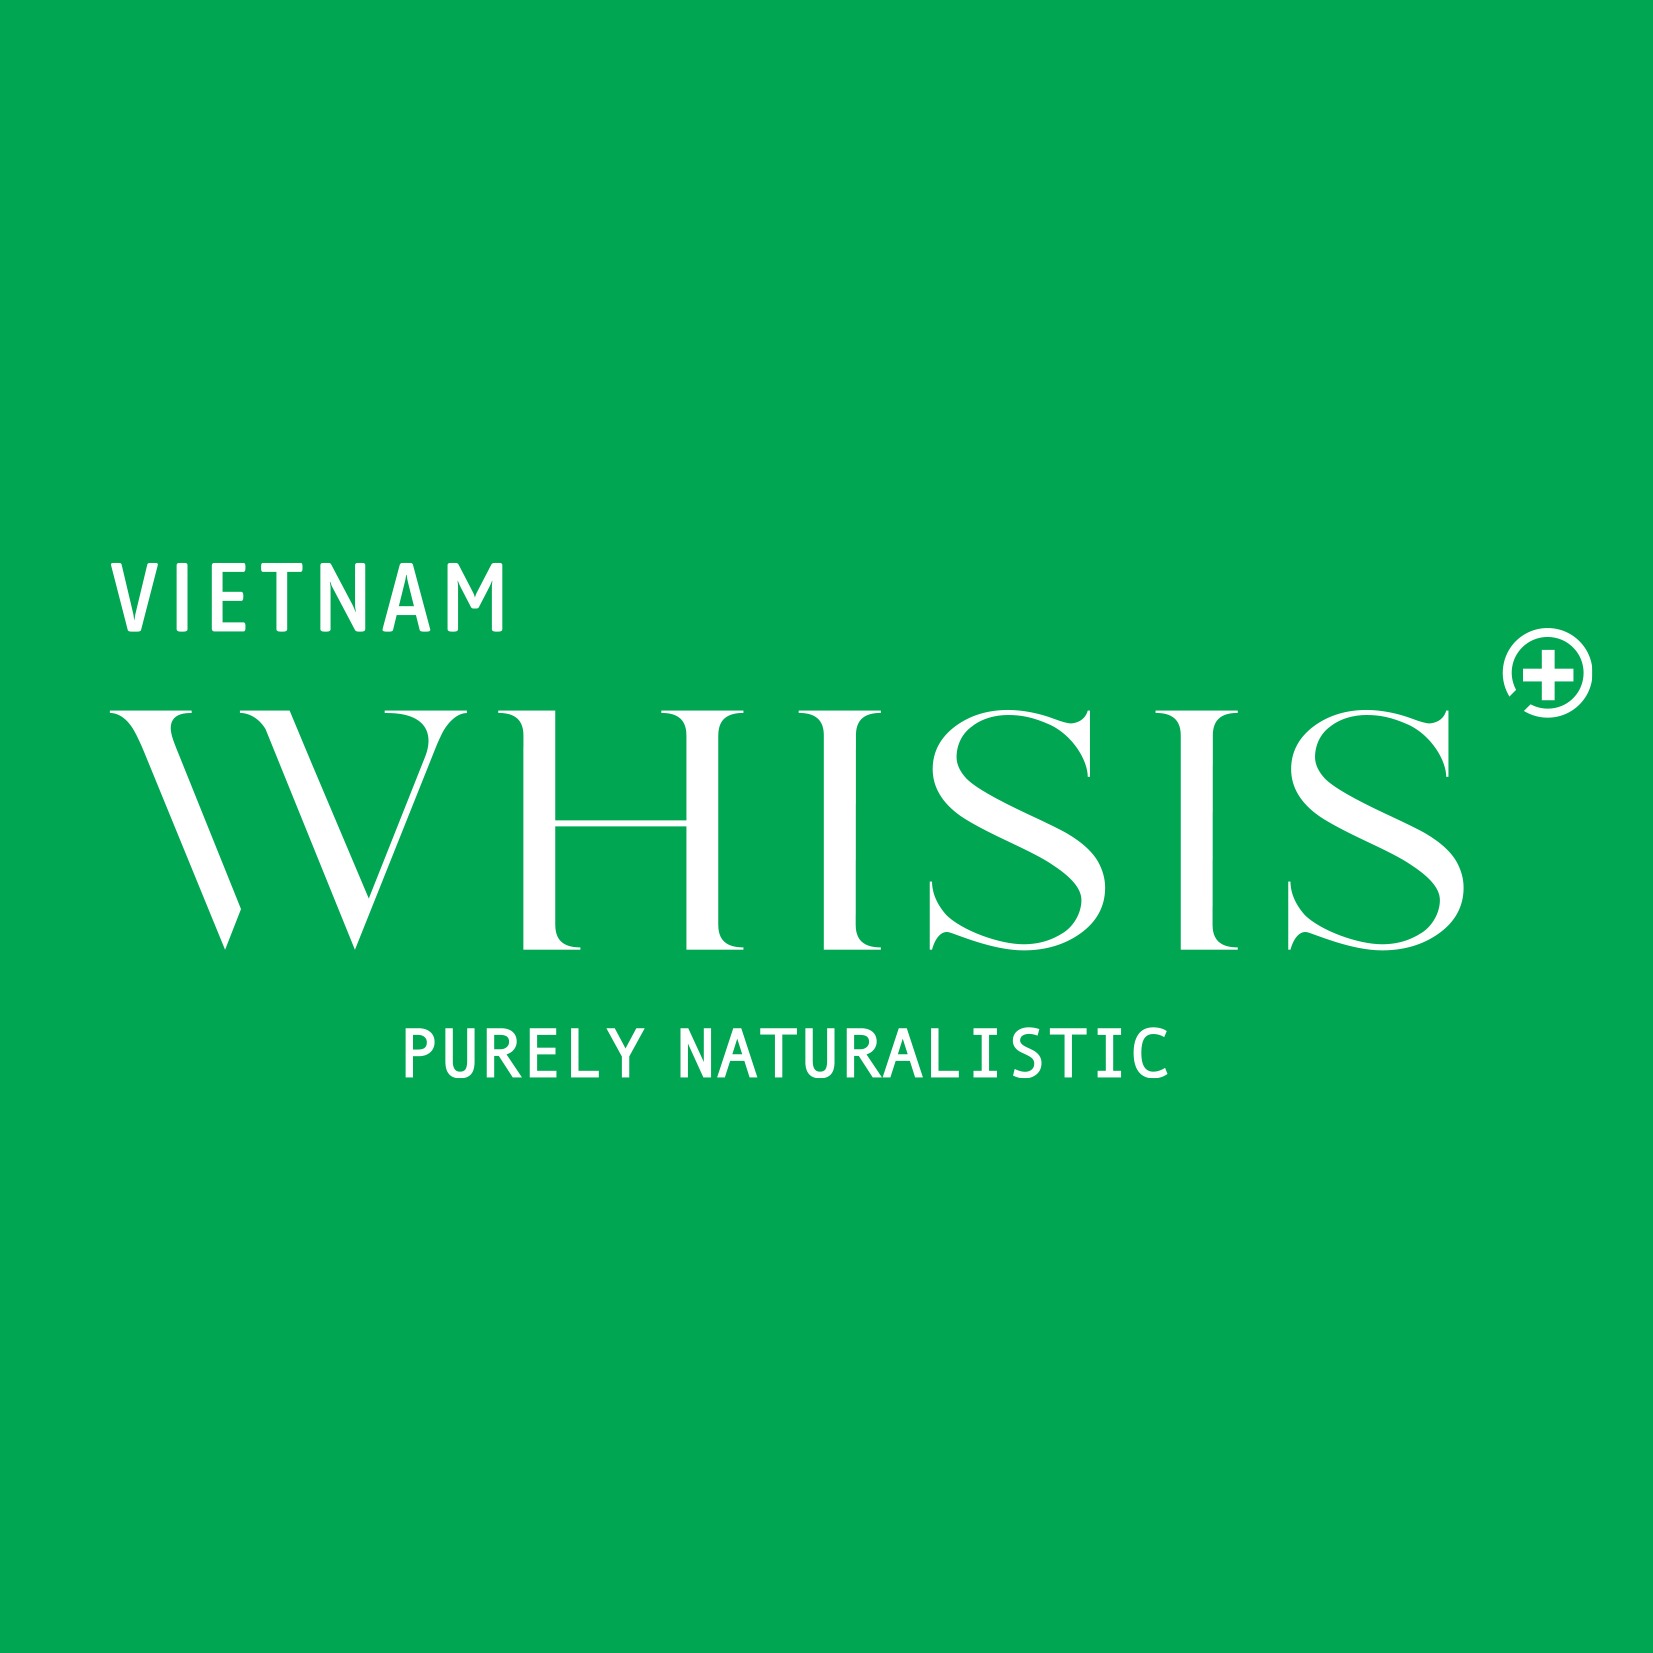 Whisis Official Store